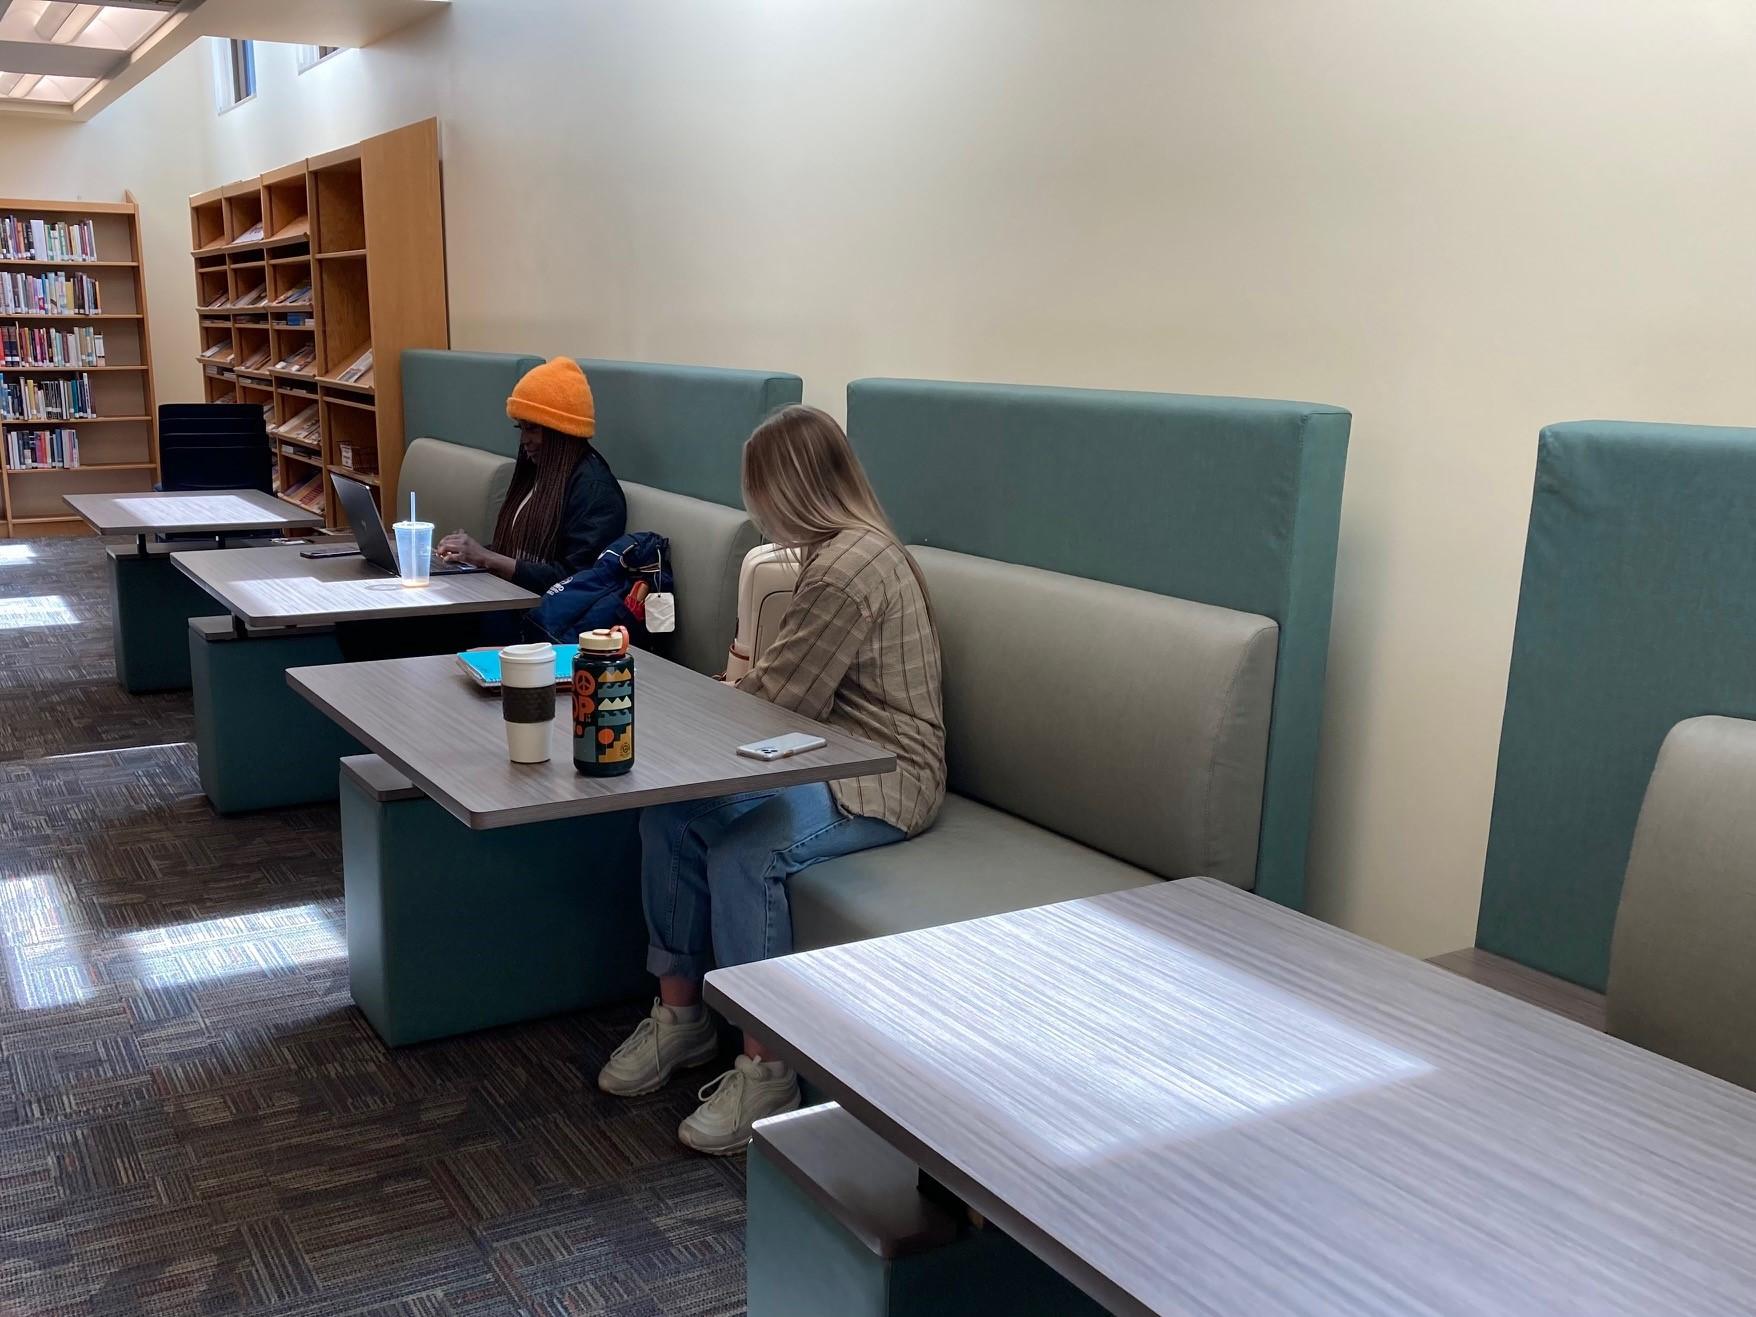 Students seated at study booths in the library